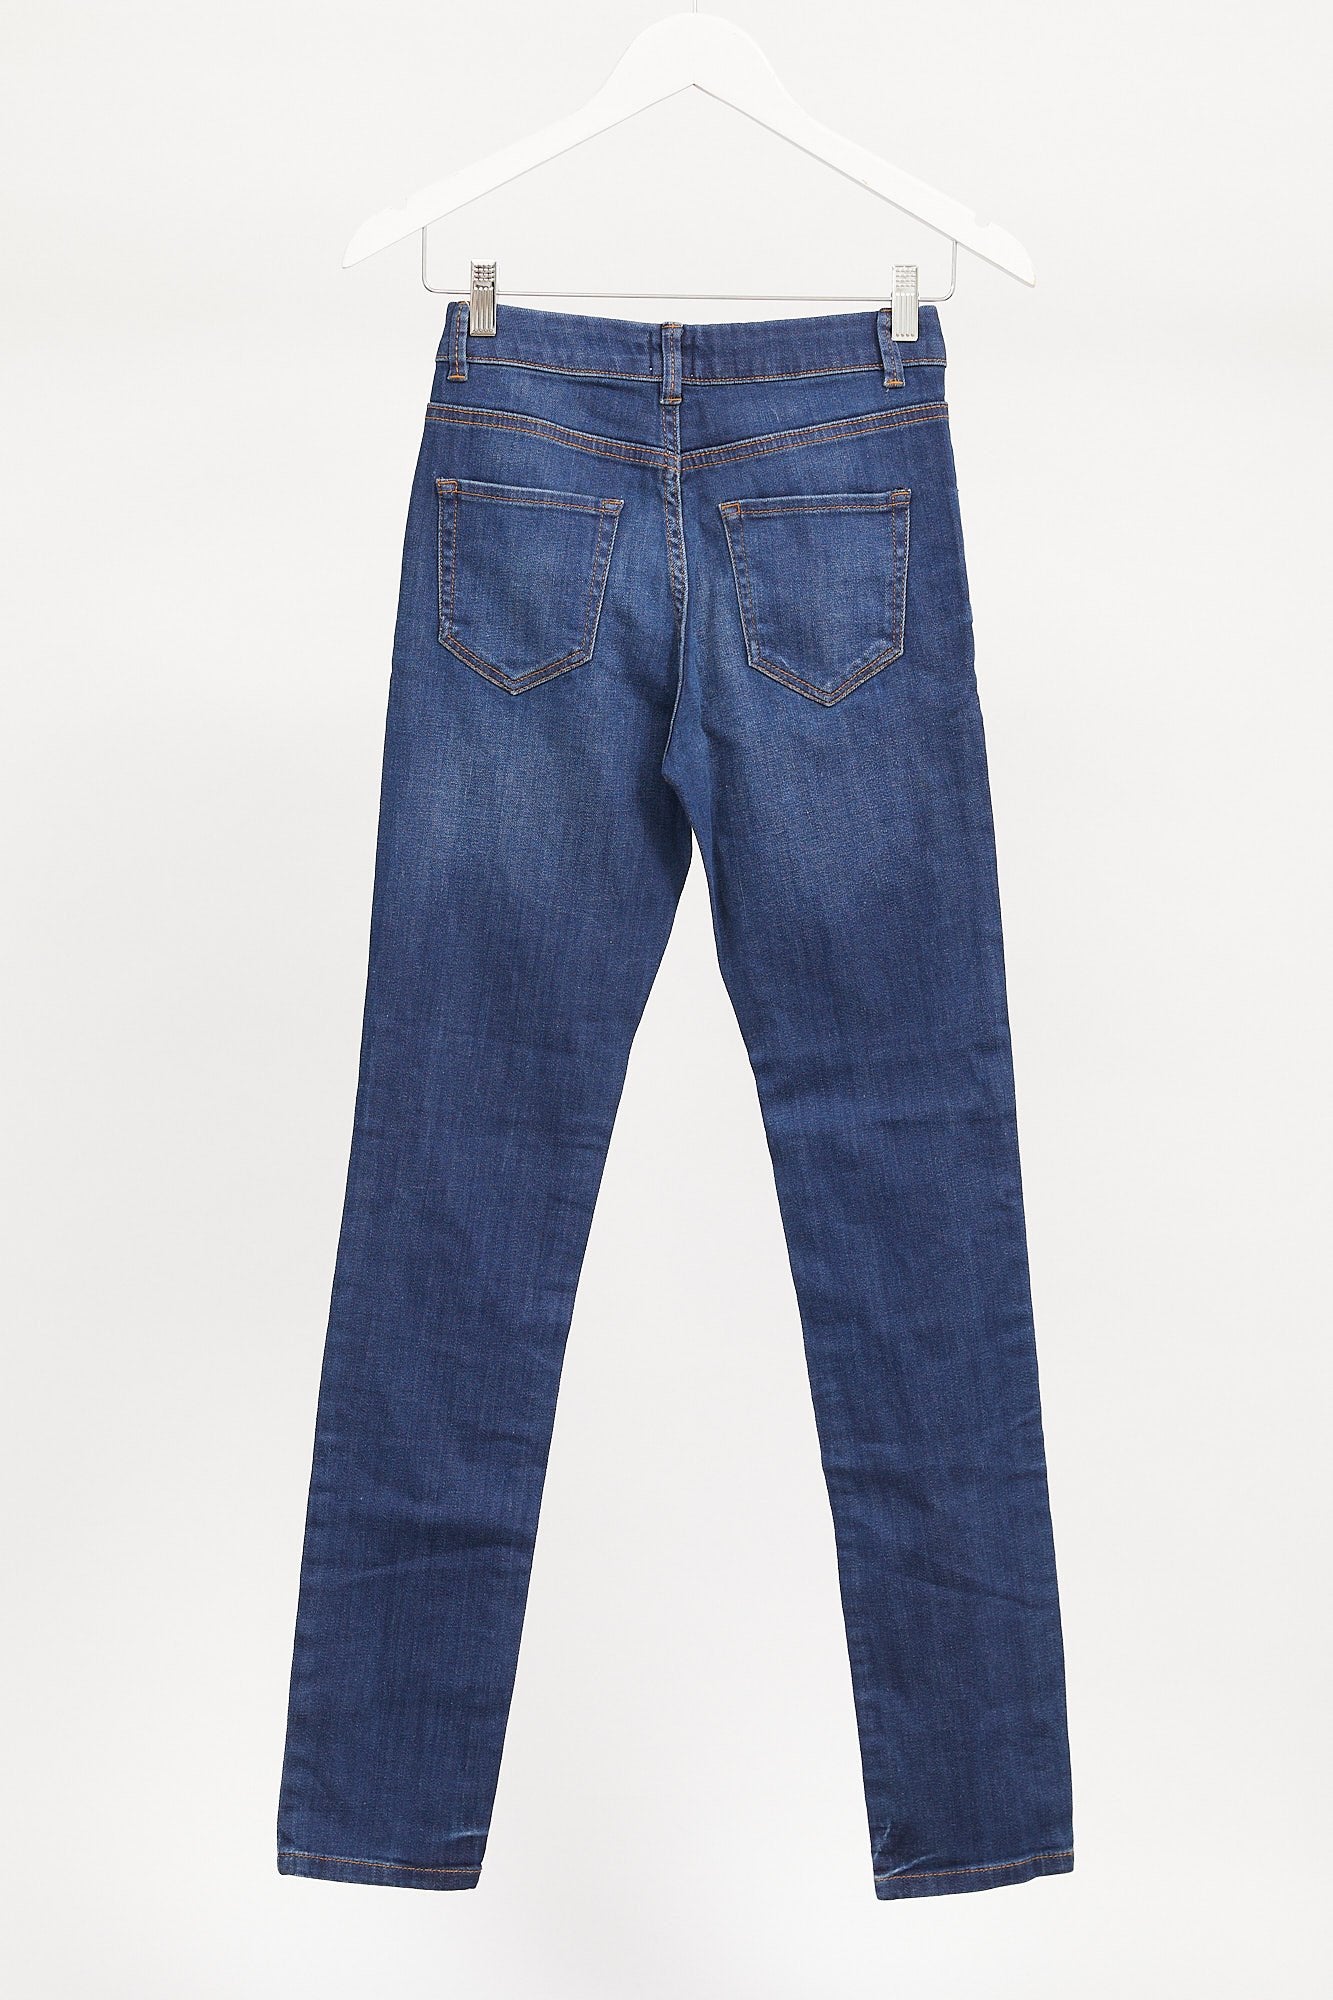 Womens Blue ASOS High Waist Jeans: Size 8 or Small